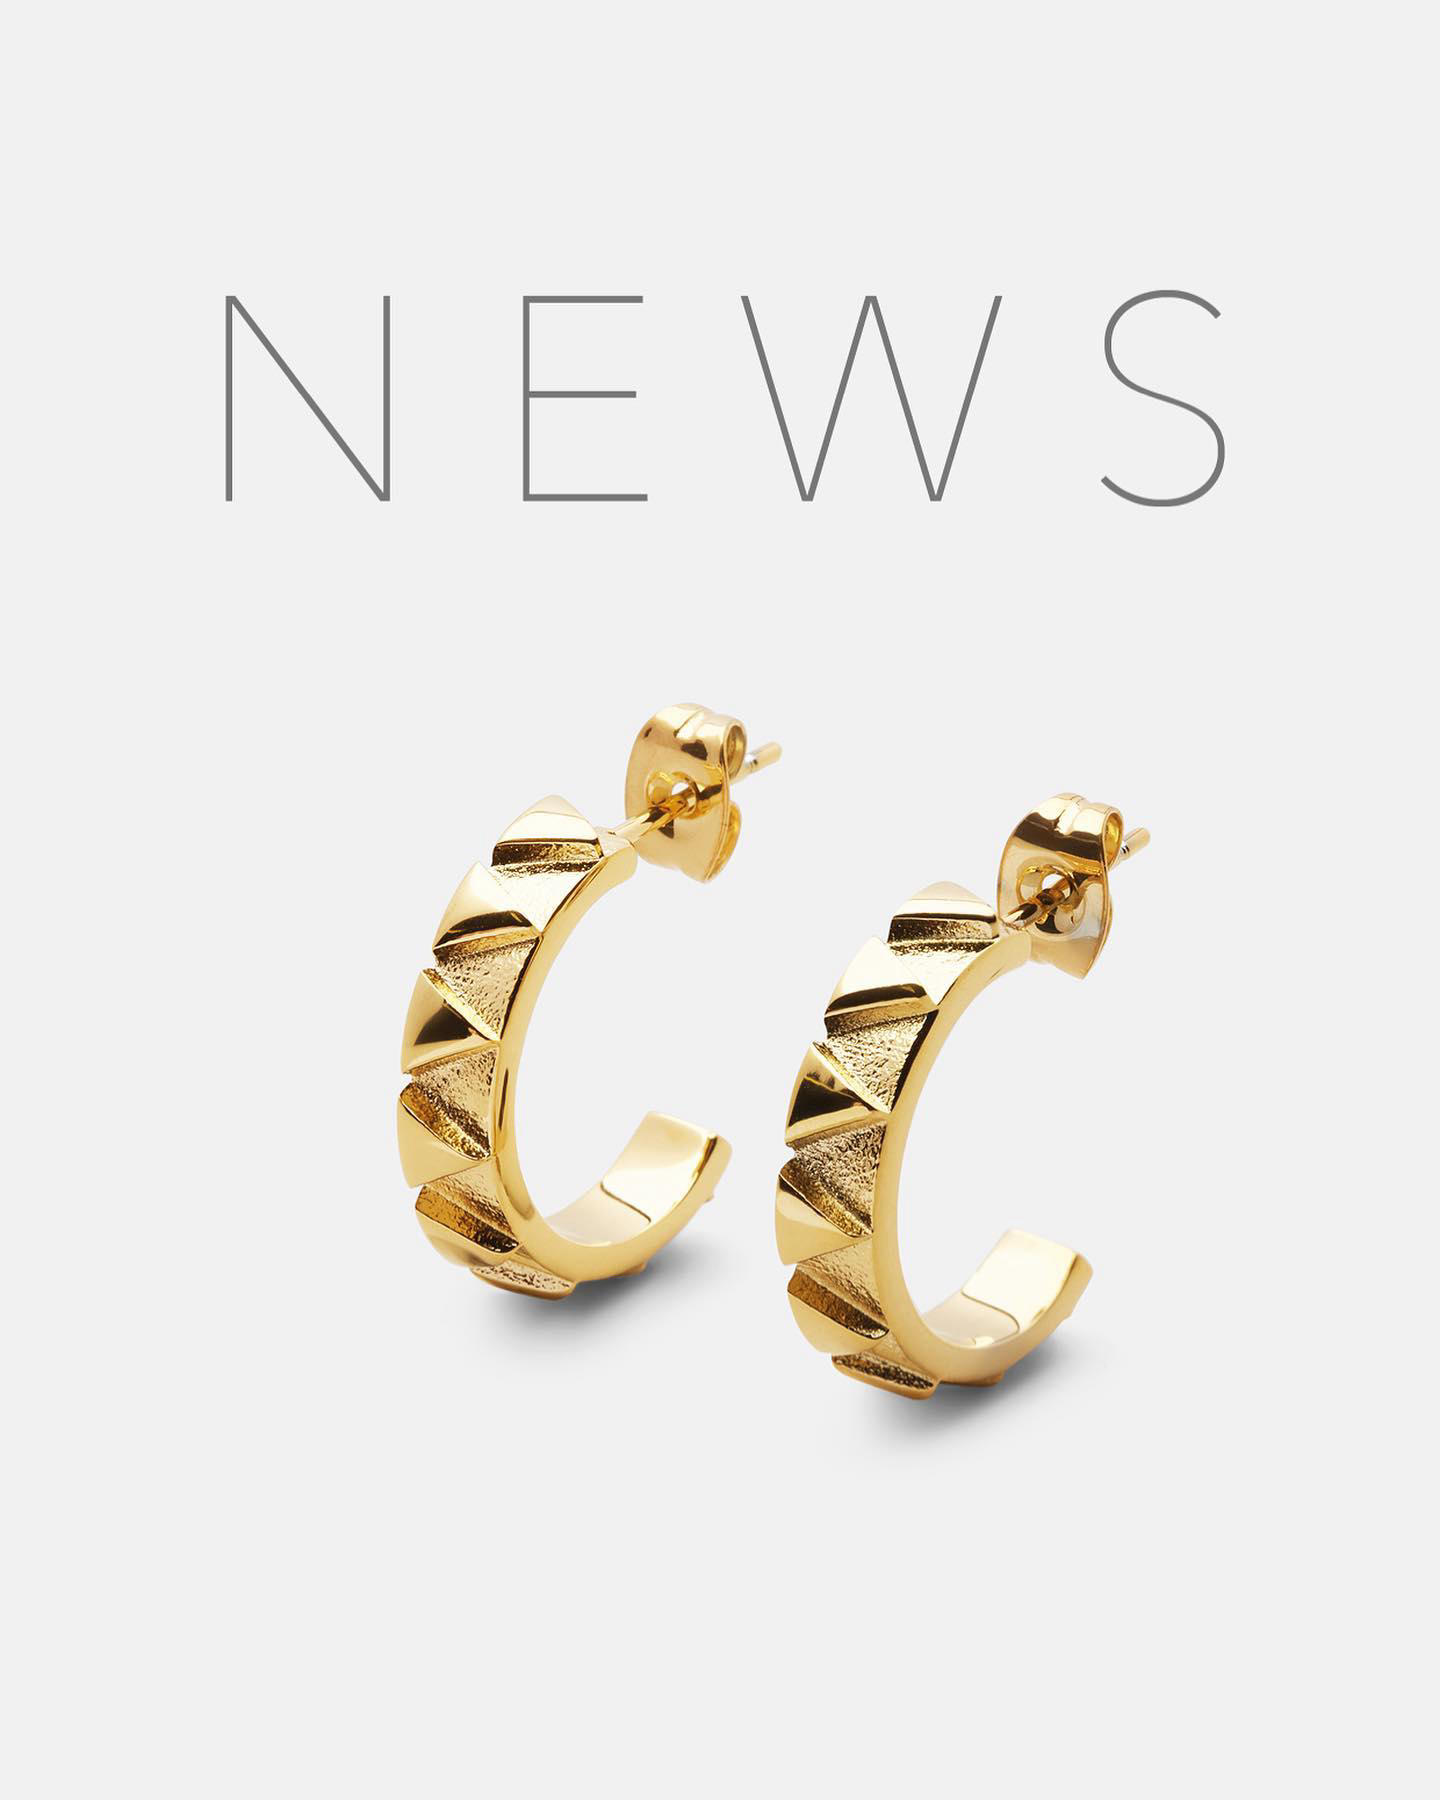 image  1 New earrings in collab with our equestrian friends at #getthegallop